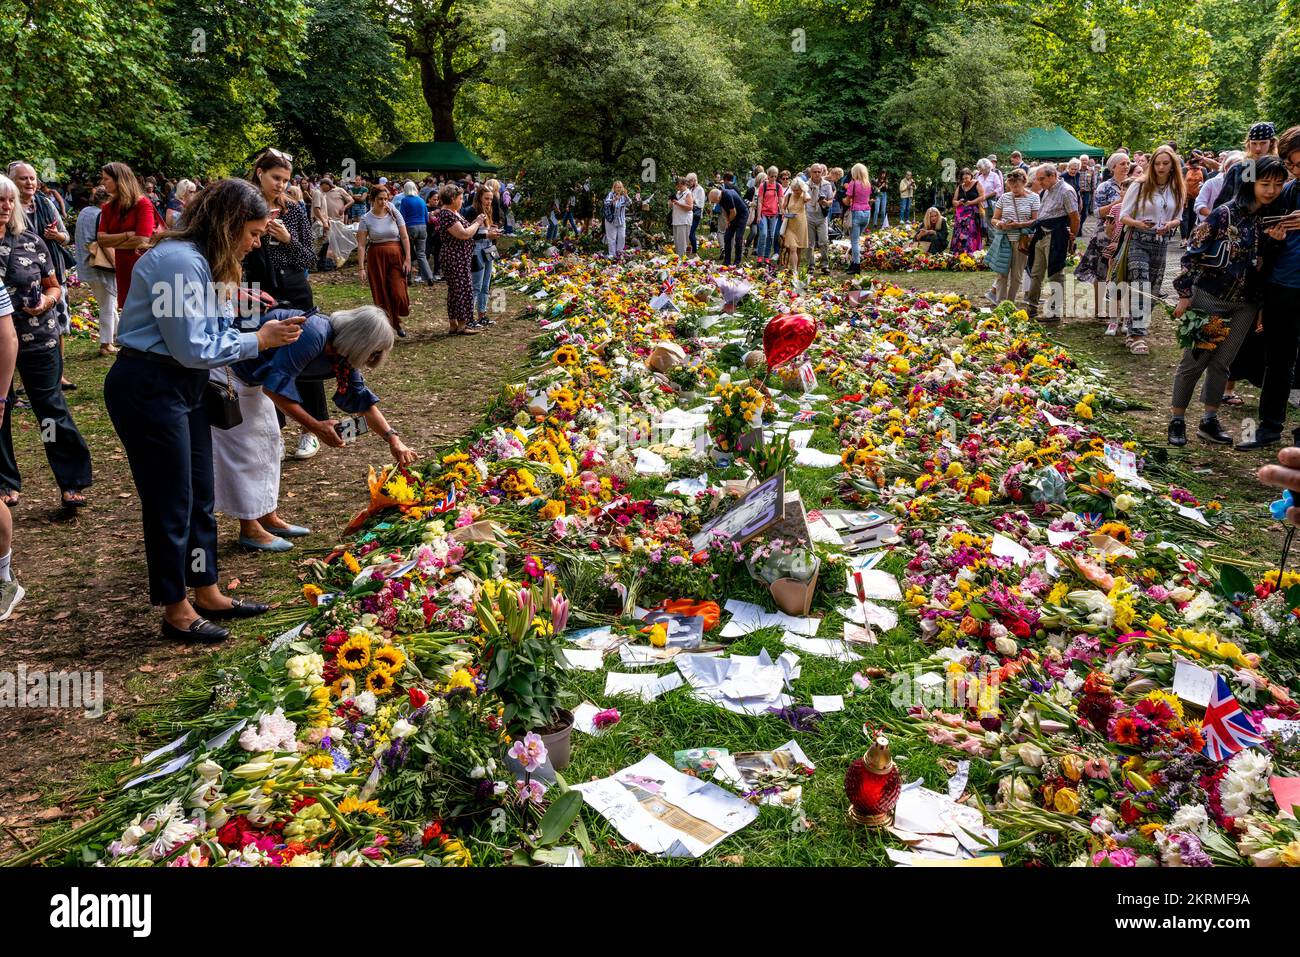 British People Looking At The Floral Tributes For Queen Elizabeth II In The Floral Tribute Garden In Green Park, London, UK. Stock Photo